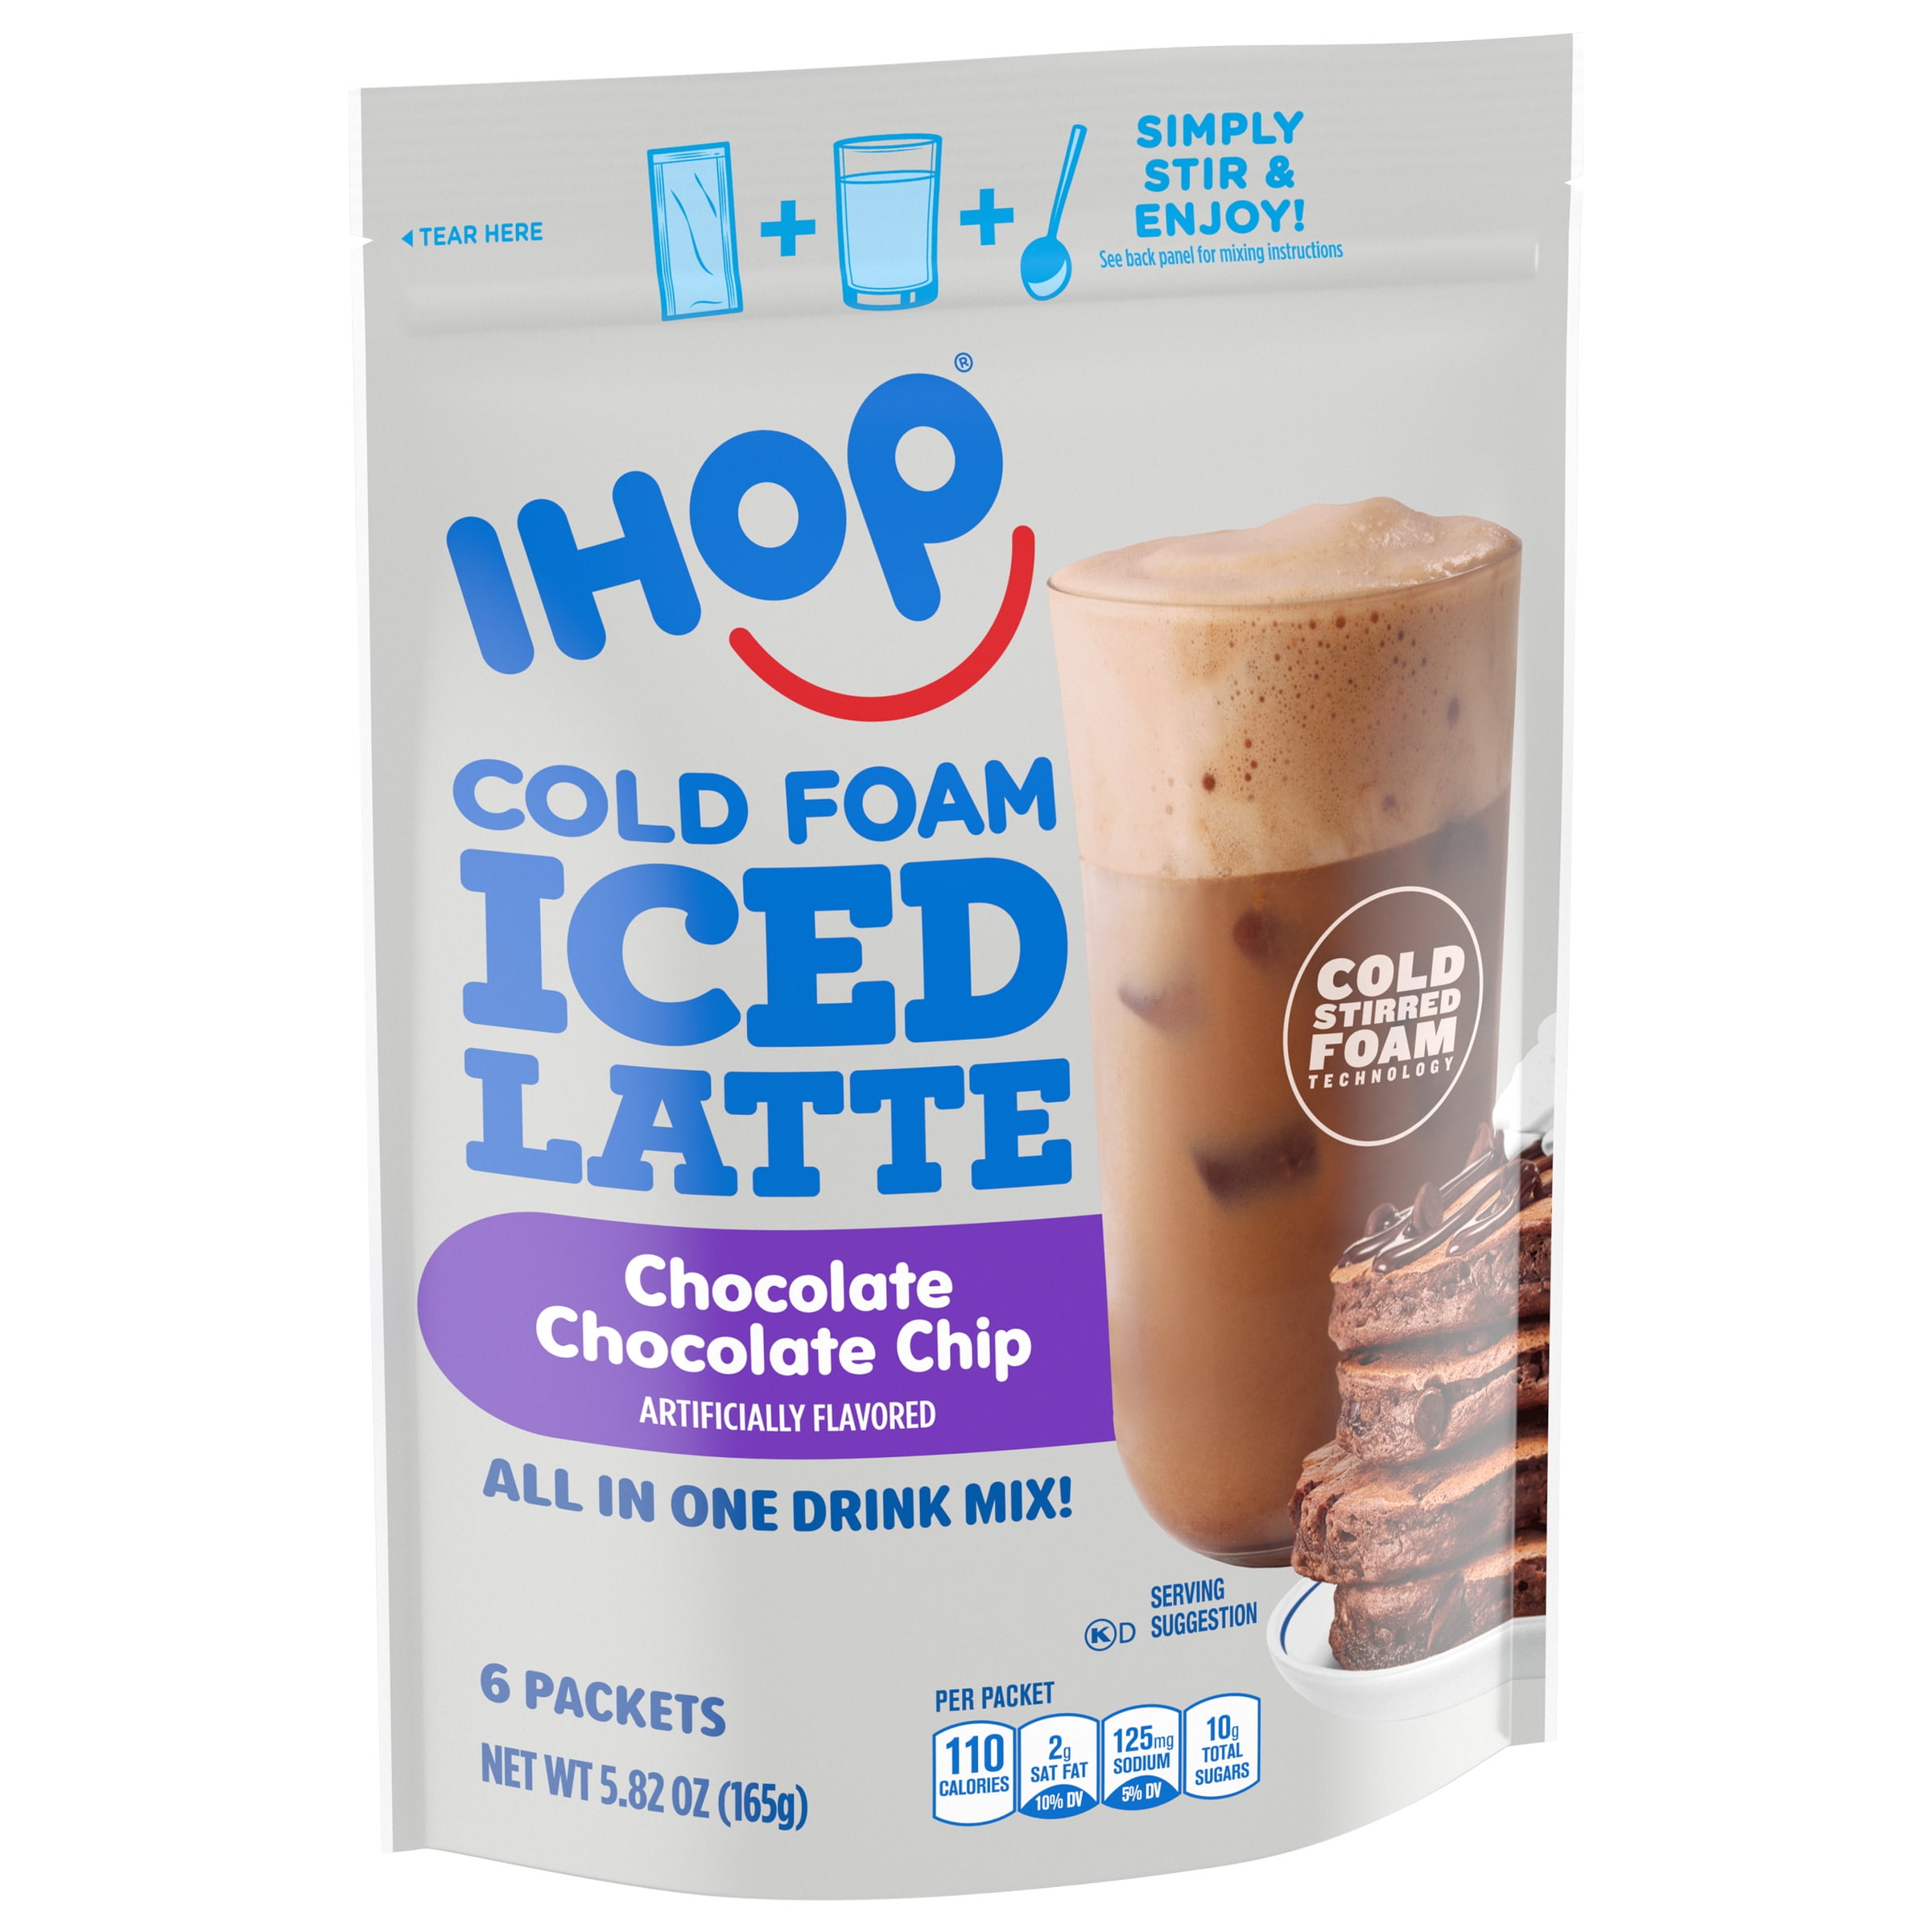 SPOTTED: IHOP Cold Foam Iced Latte and Maxwell House Iced Latte with Foam -  The Impulsive Buy